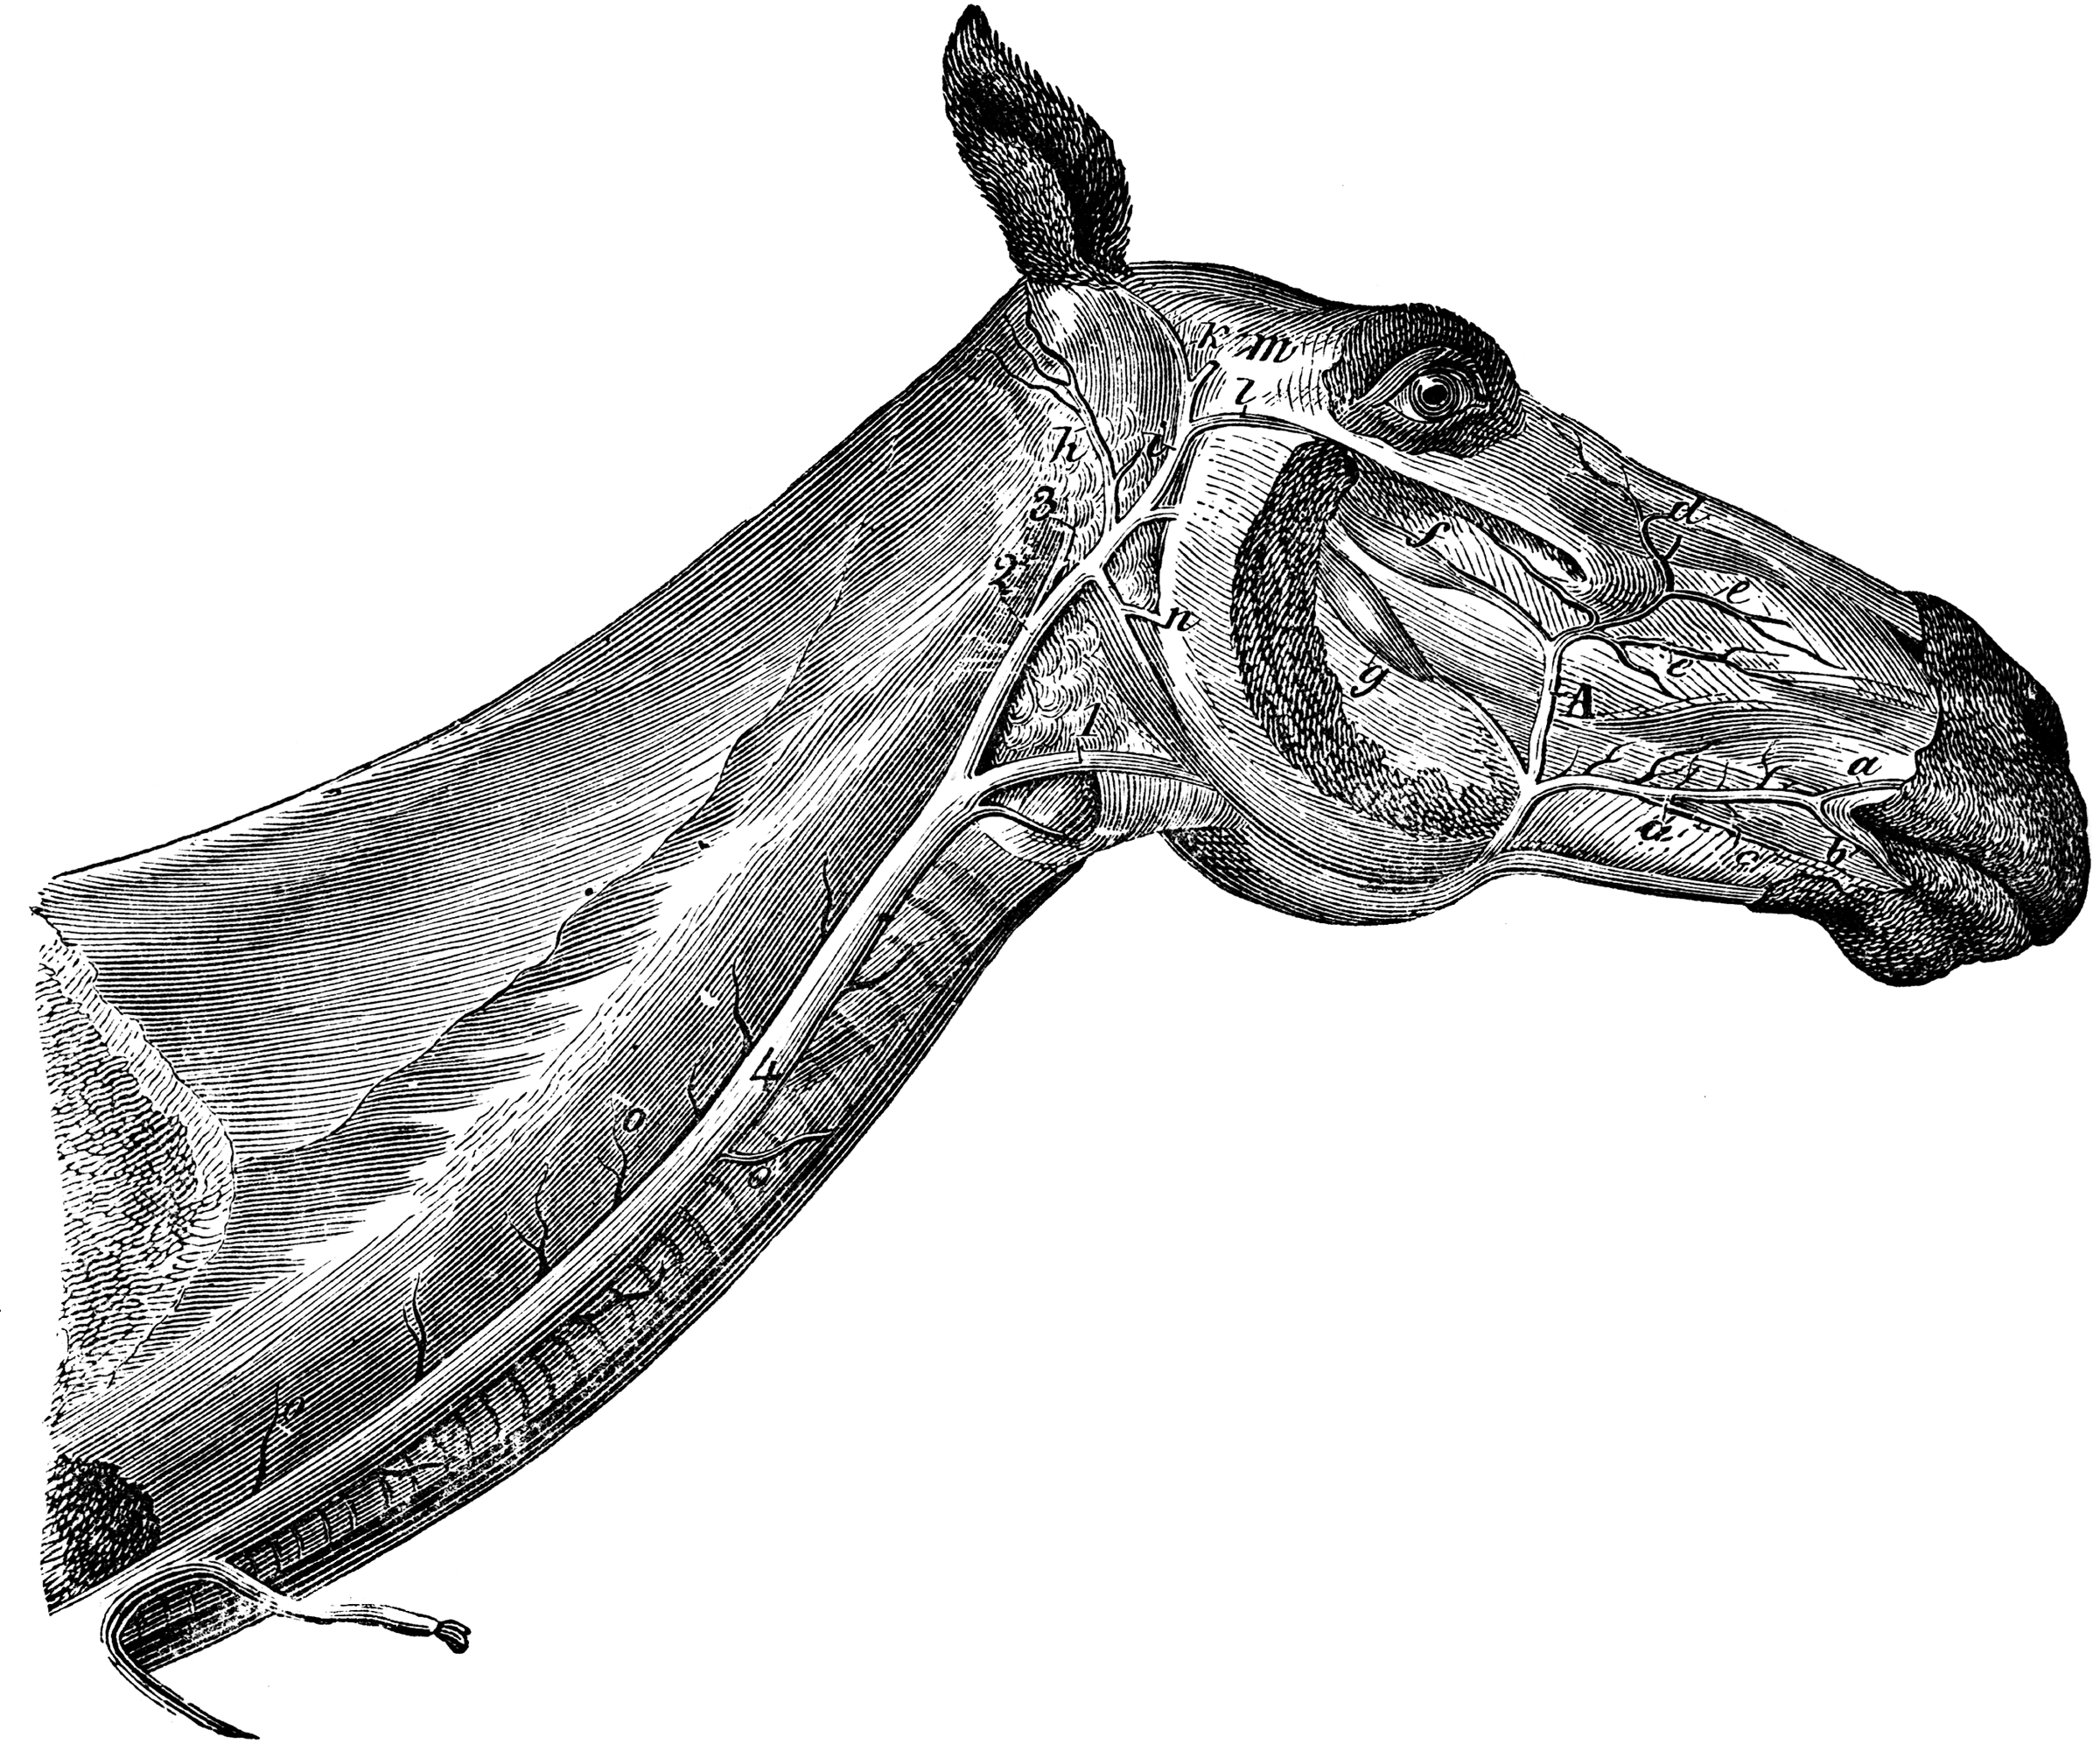 Head and Neck of a Horse Showing Veins | ClipArt ETC